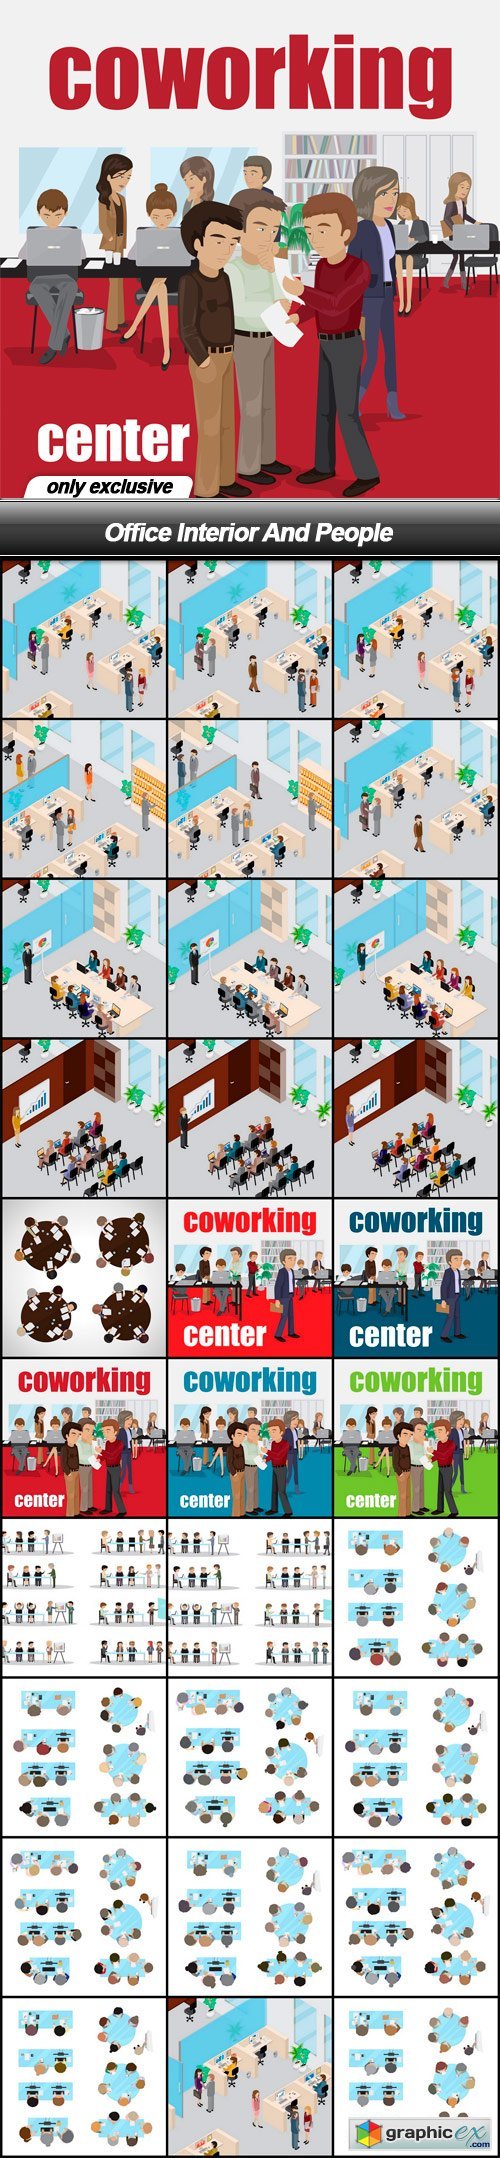 Office Interior And People - 29 EPS